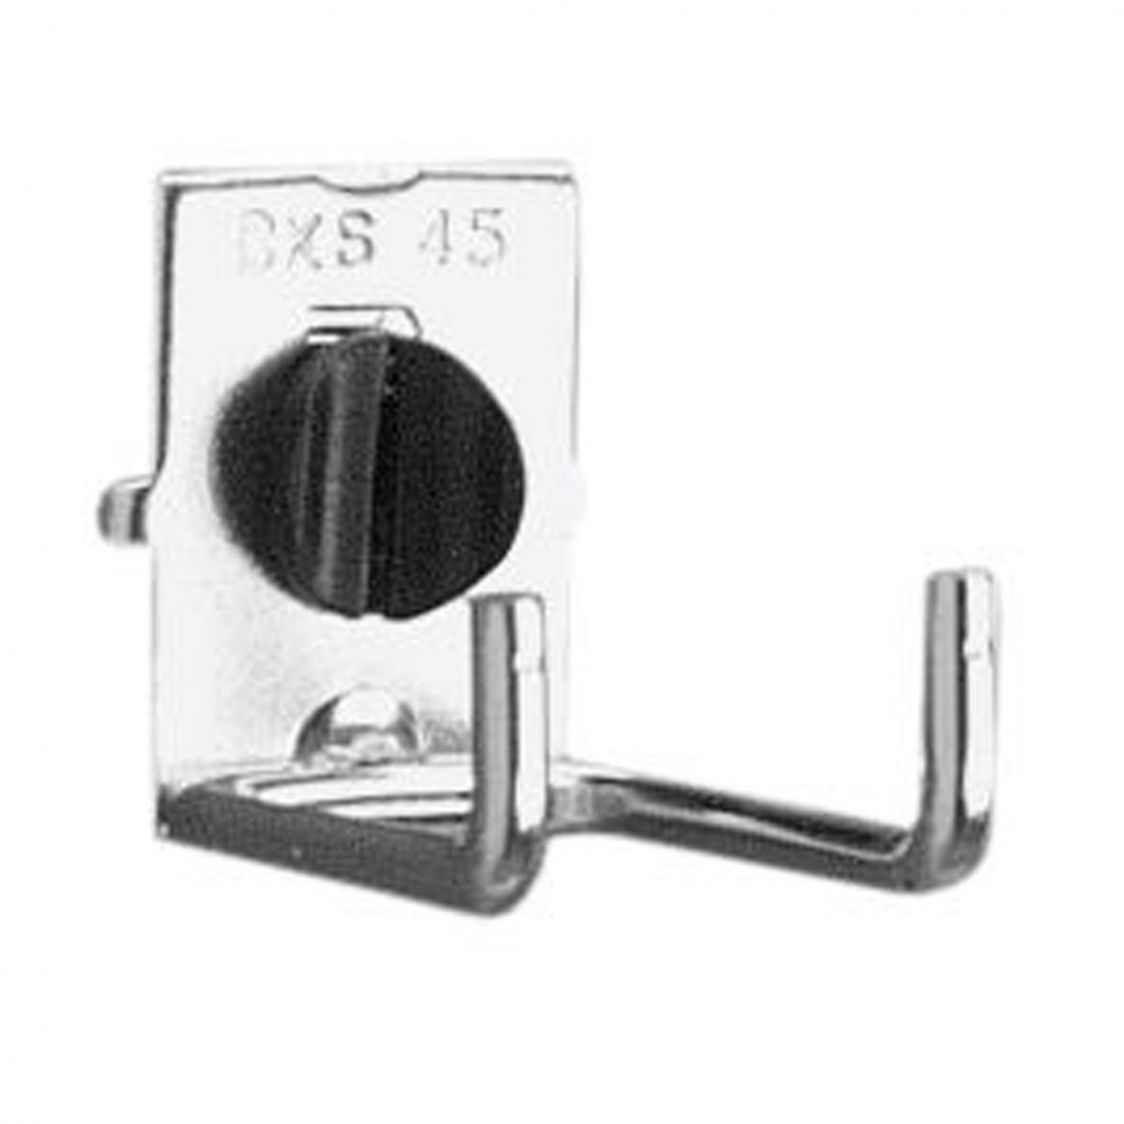 FACOM CKS.45A - 17mm Tool Hook For Hammers